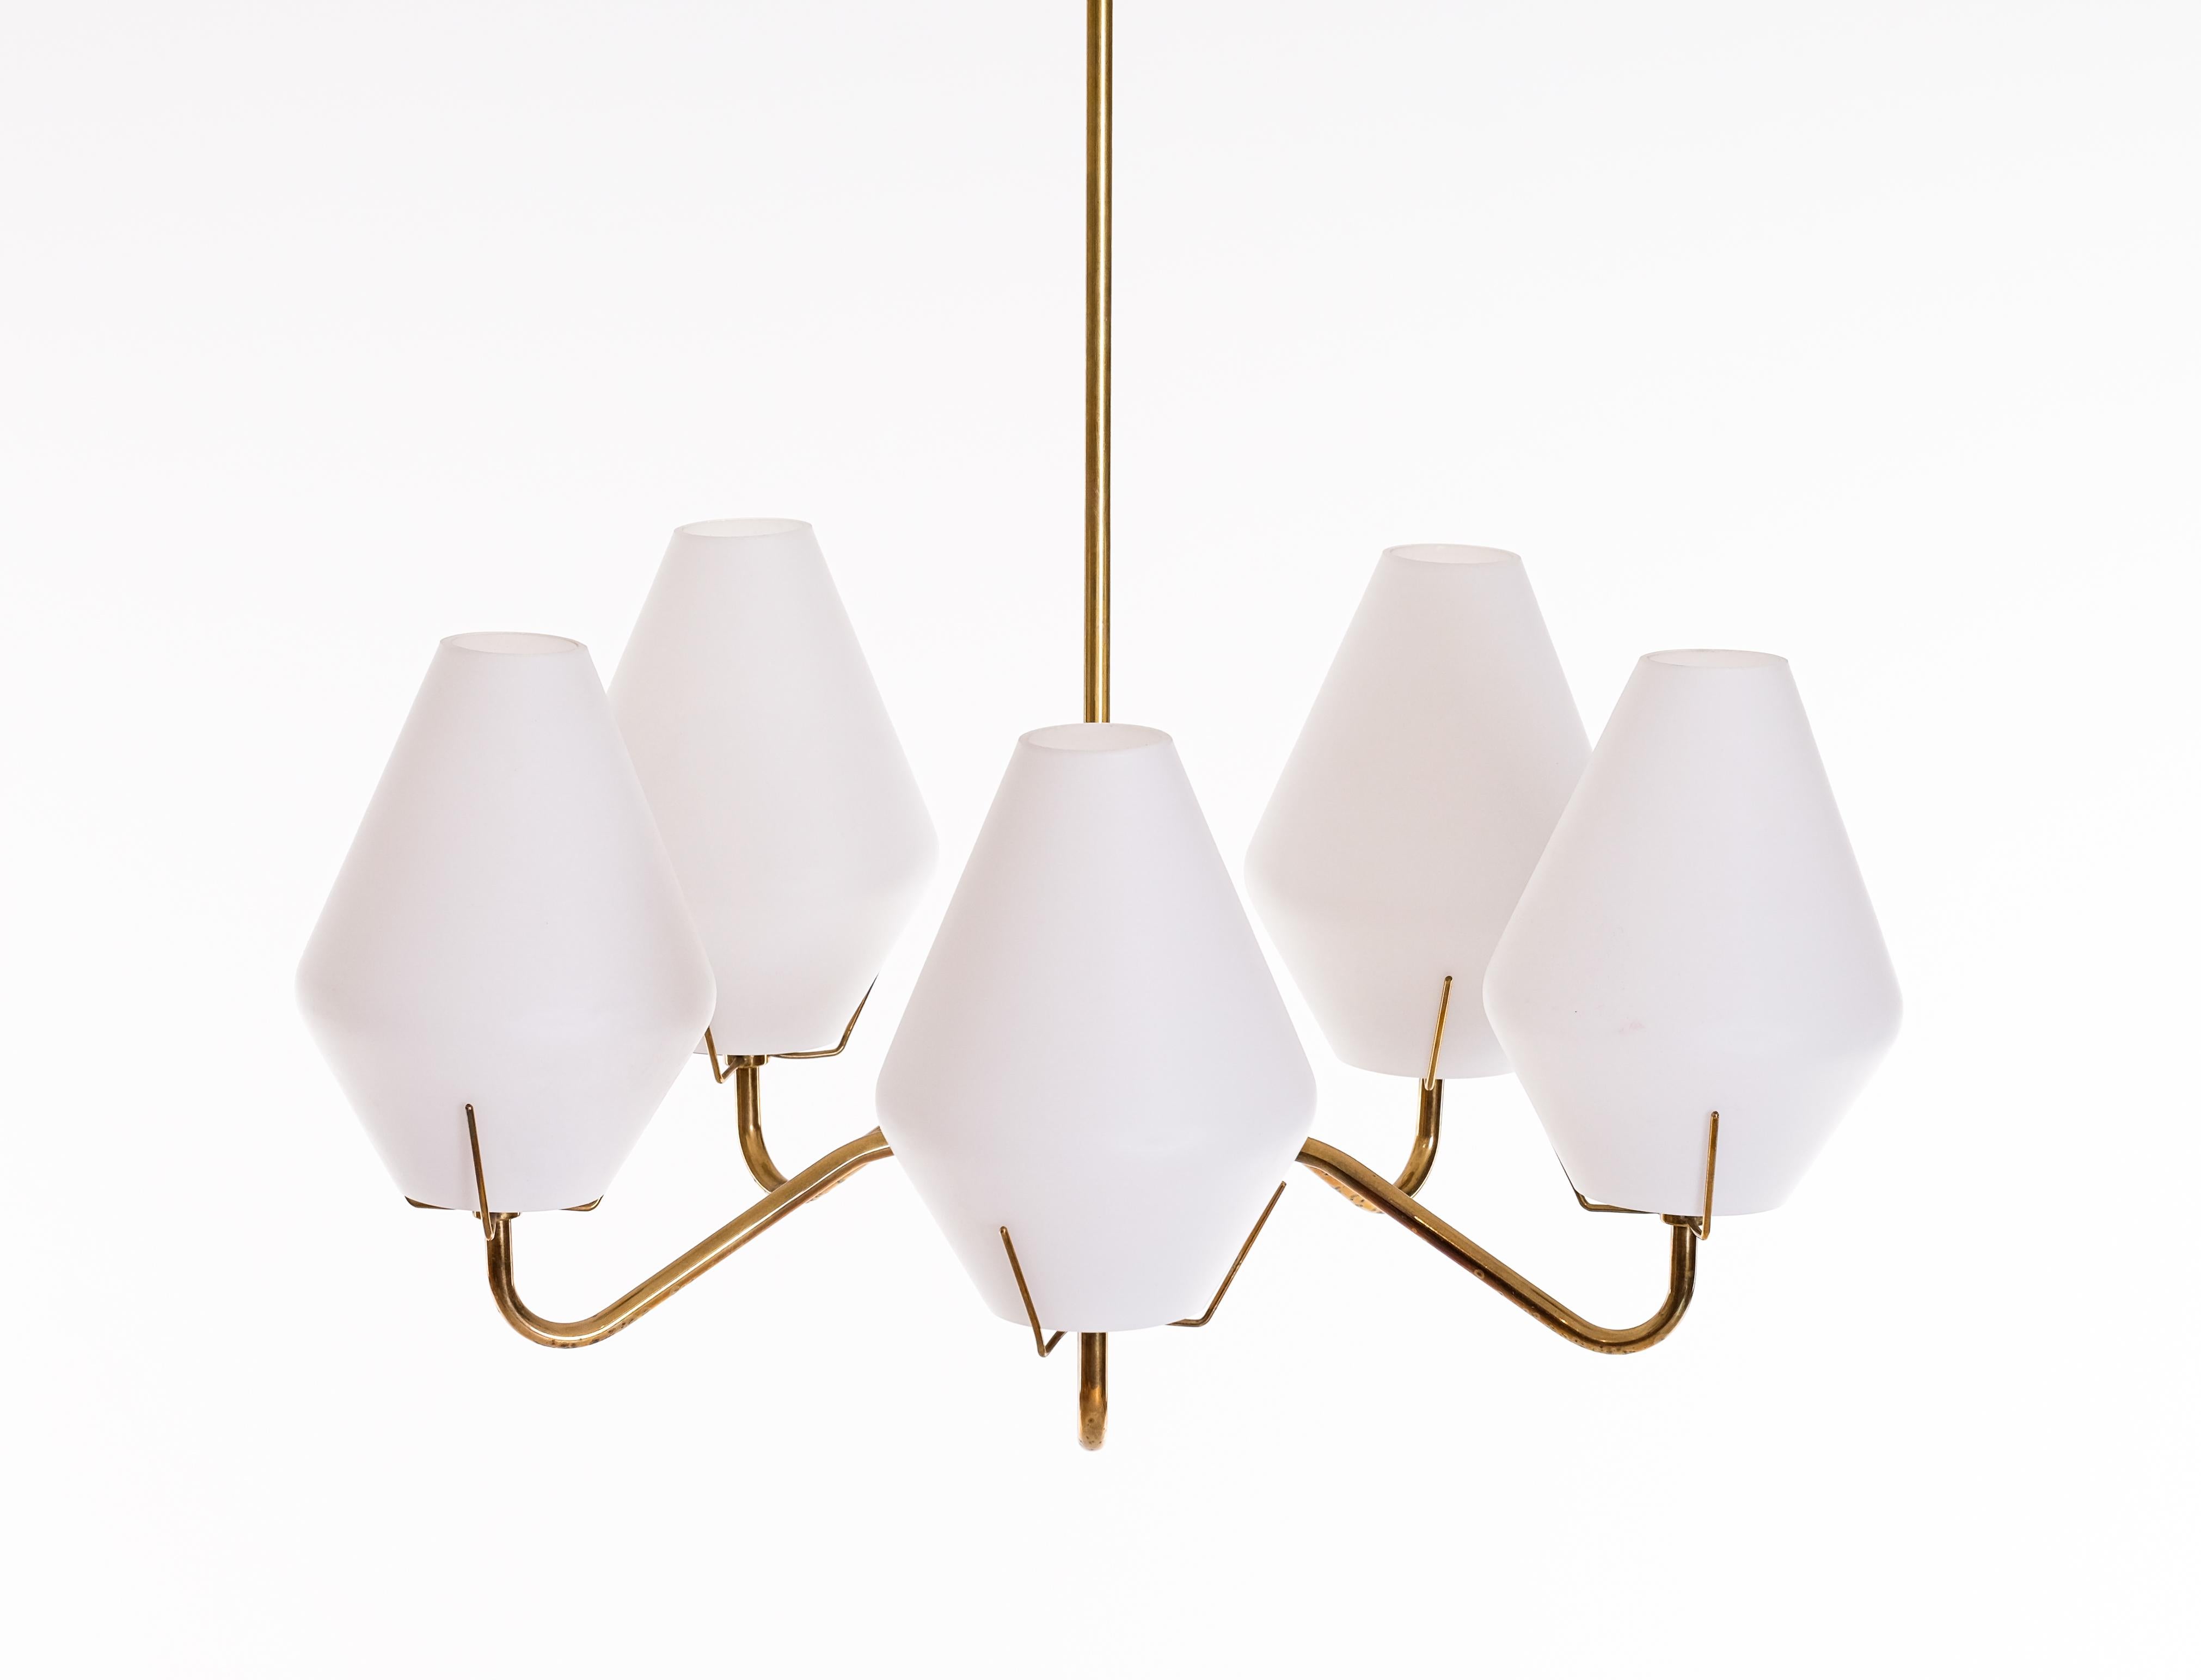 Mid-20th Century Set of 2 Brass Chandeliers by ASEA, Sweden, 1950s For Sale